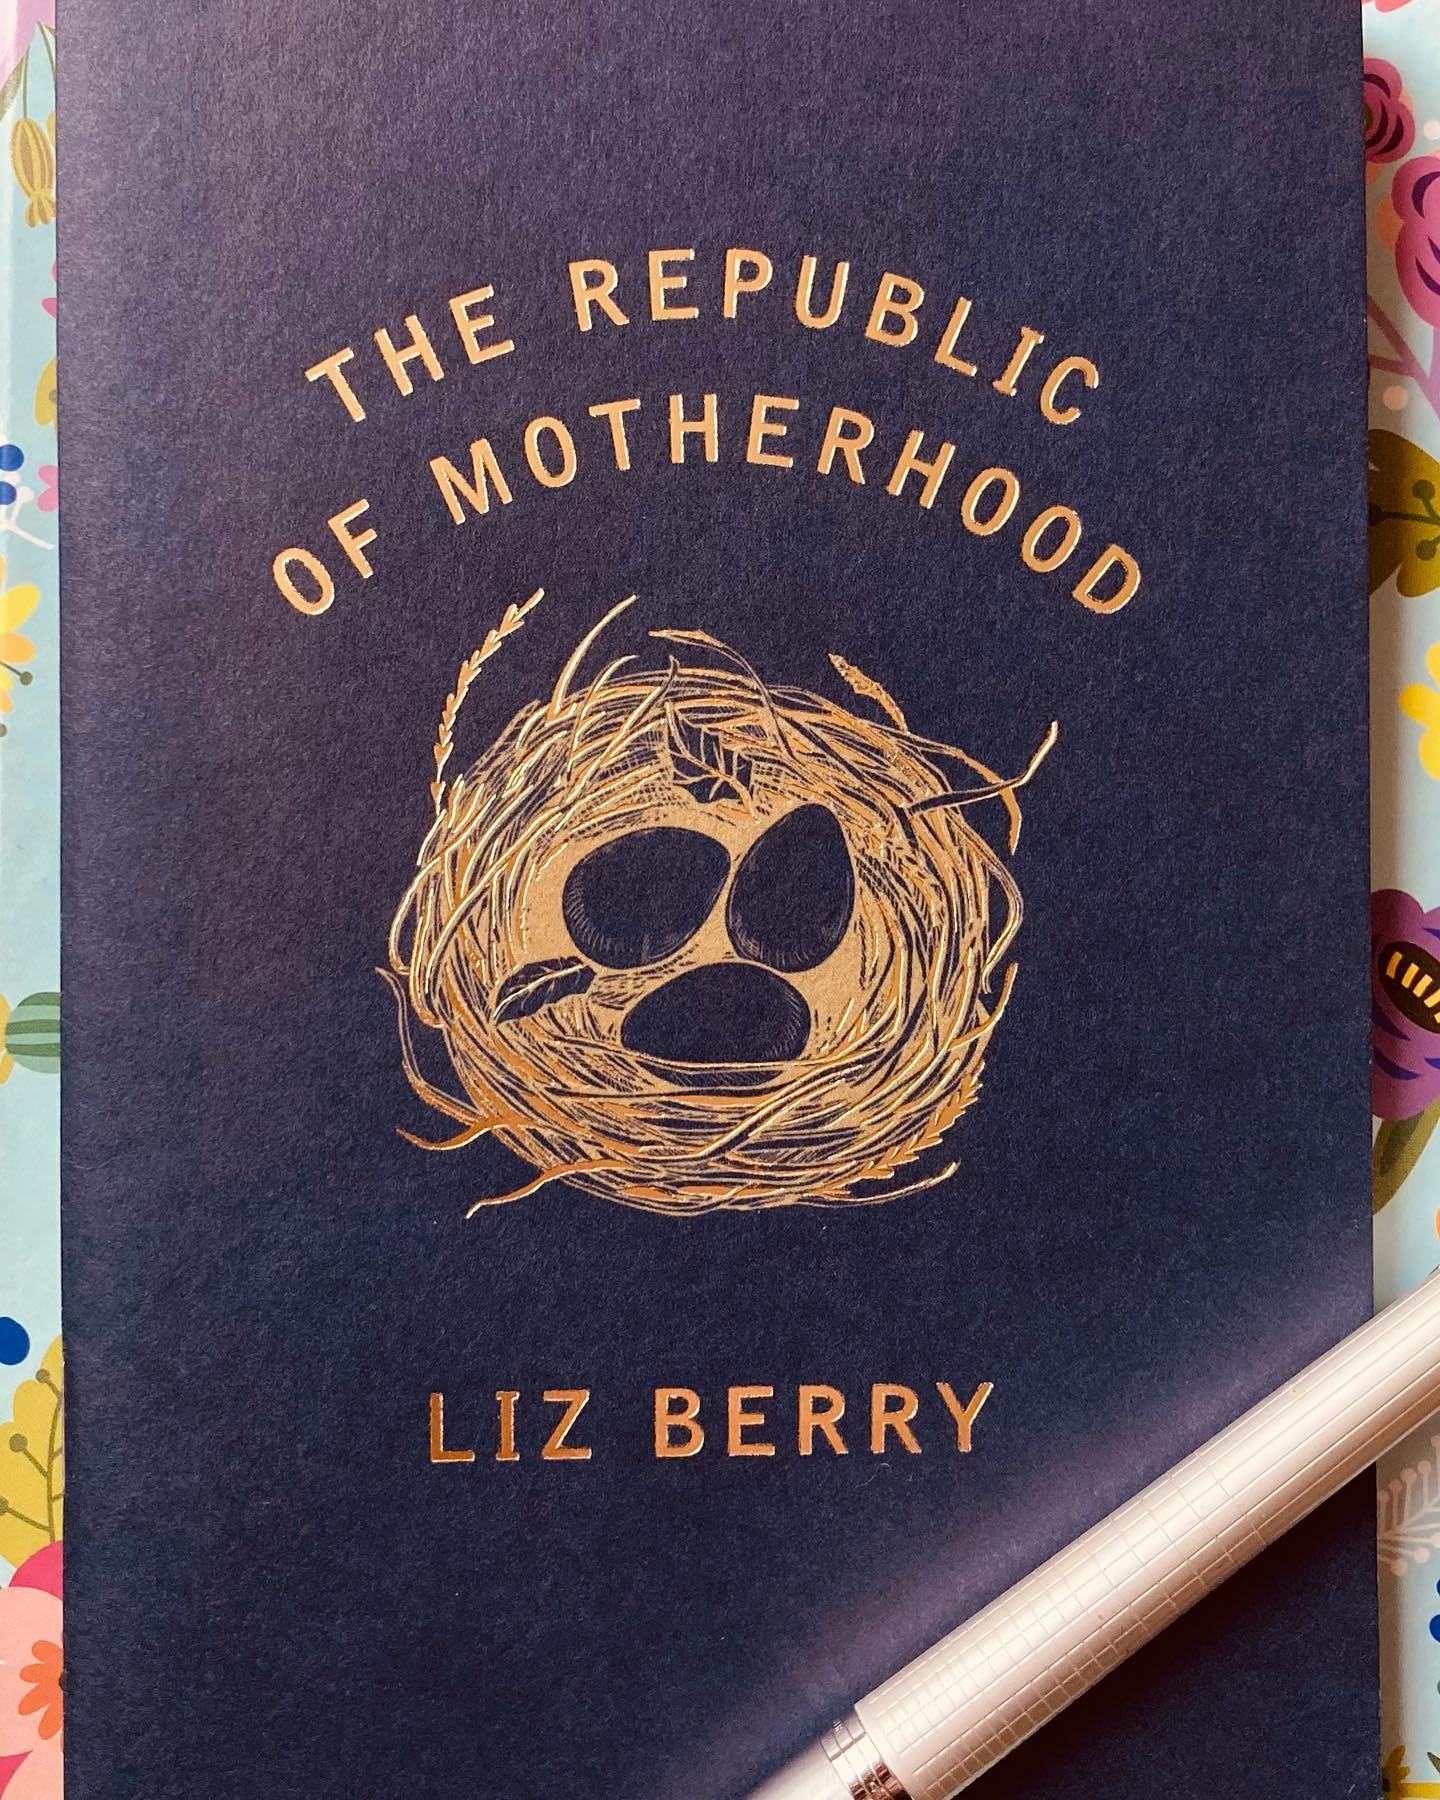 Just finished reading this brilliant collection by @misslizberry The beautiful title poem &lsquo;The Republic of Motherhood&rsquo; will forever stay with me. Thanks @sineadgleeson for inspiring me to read this following your recent post.